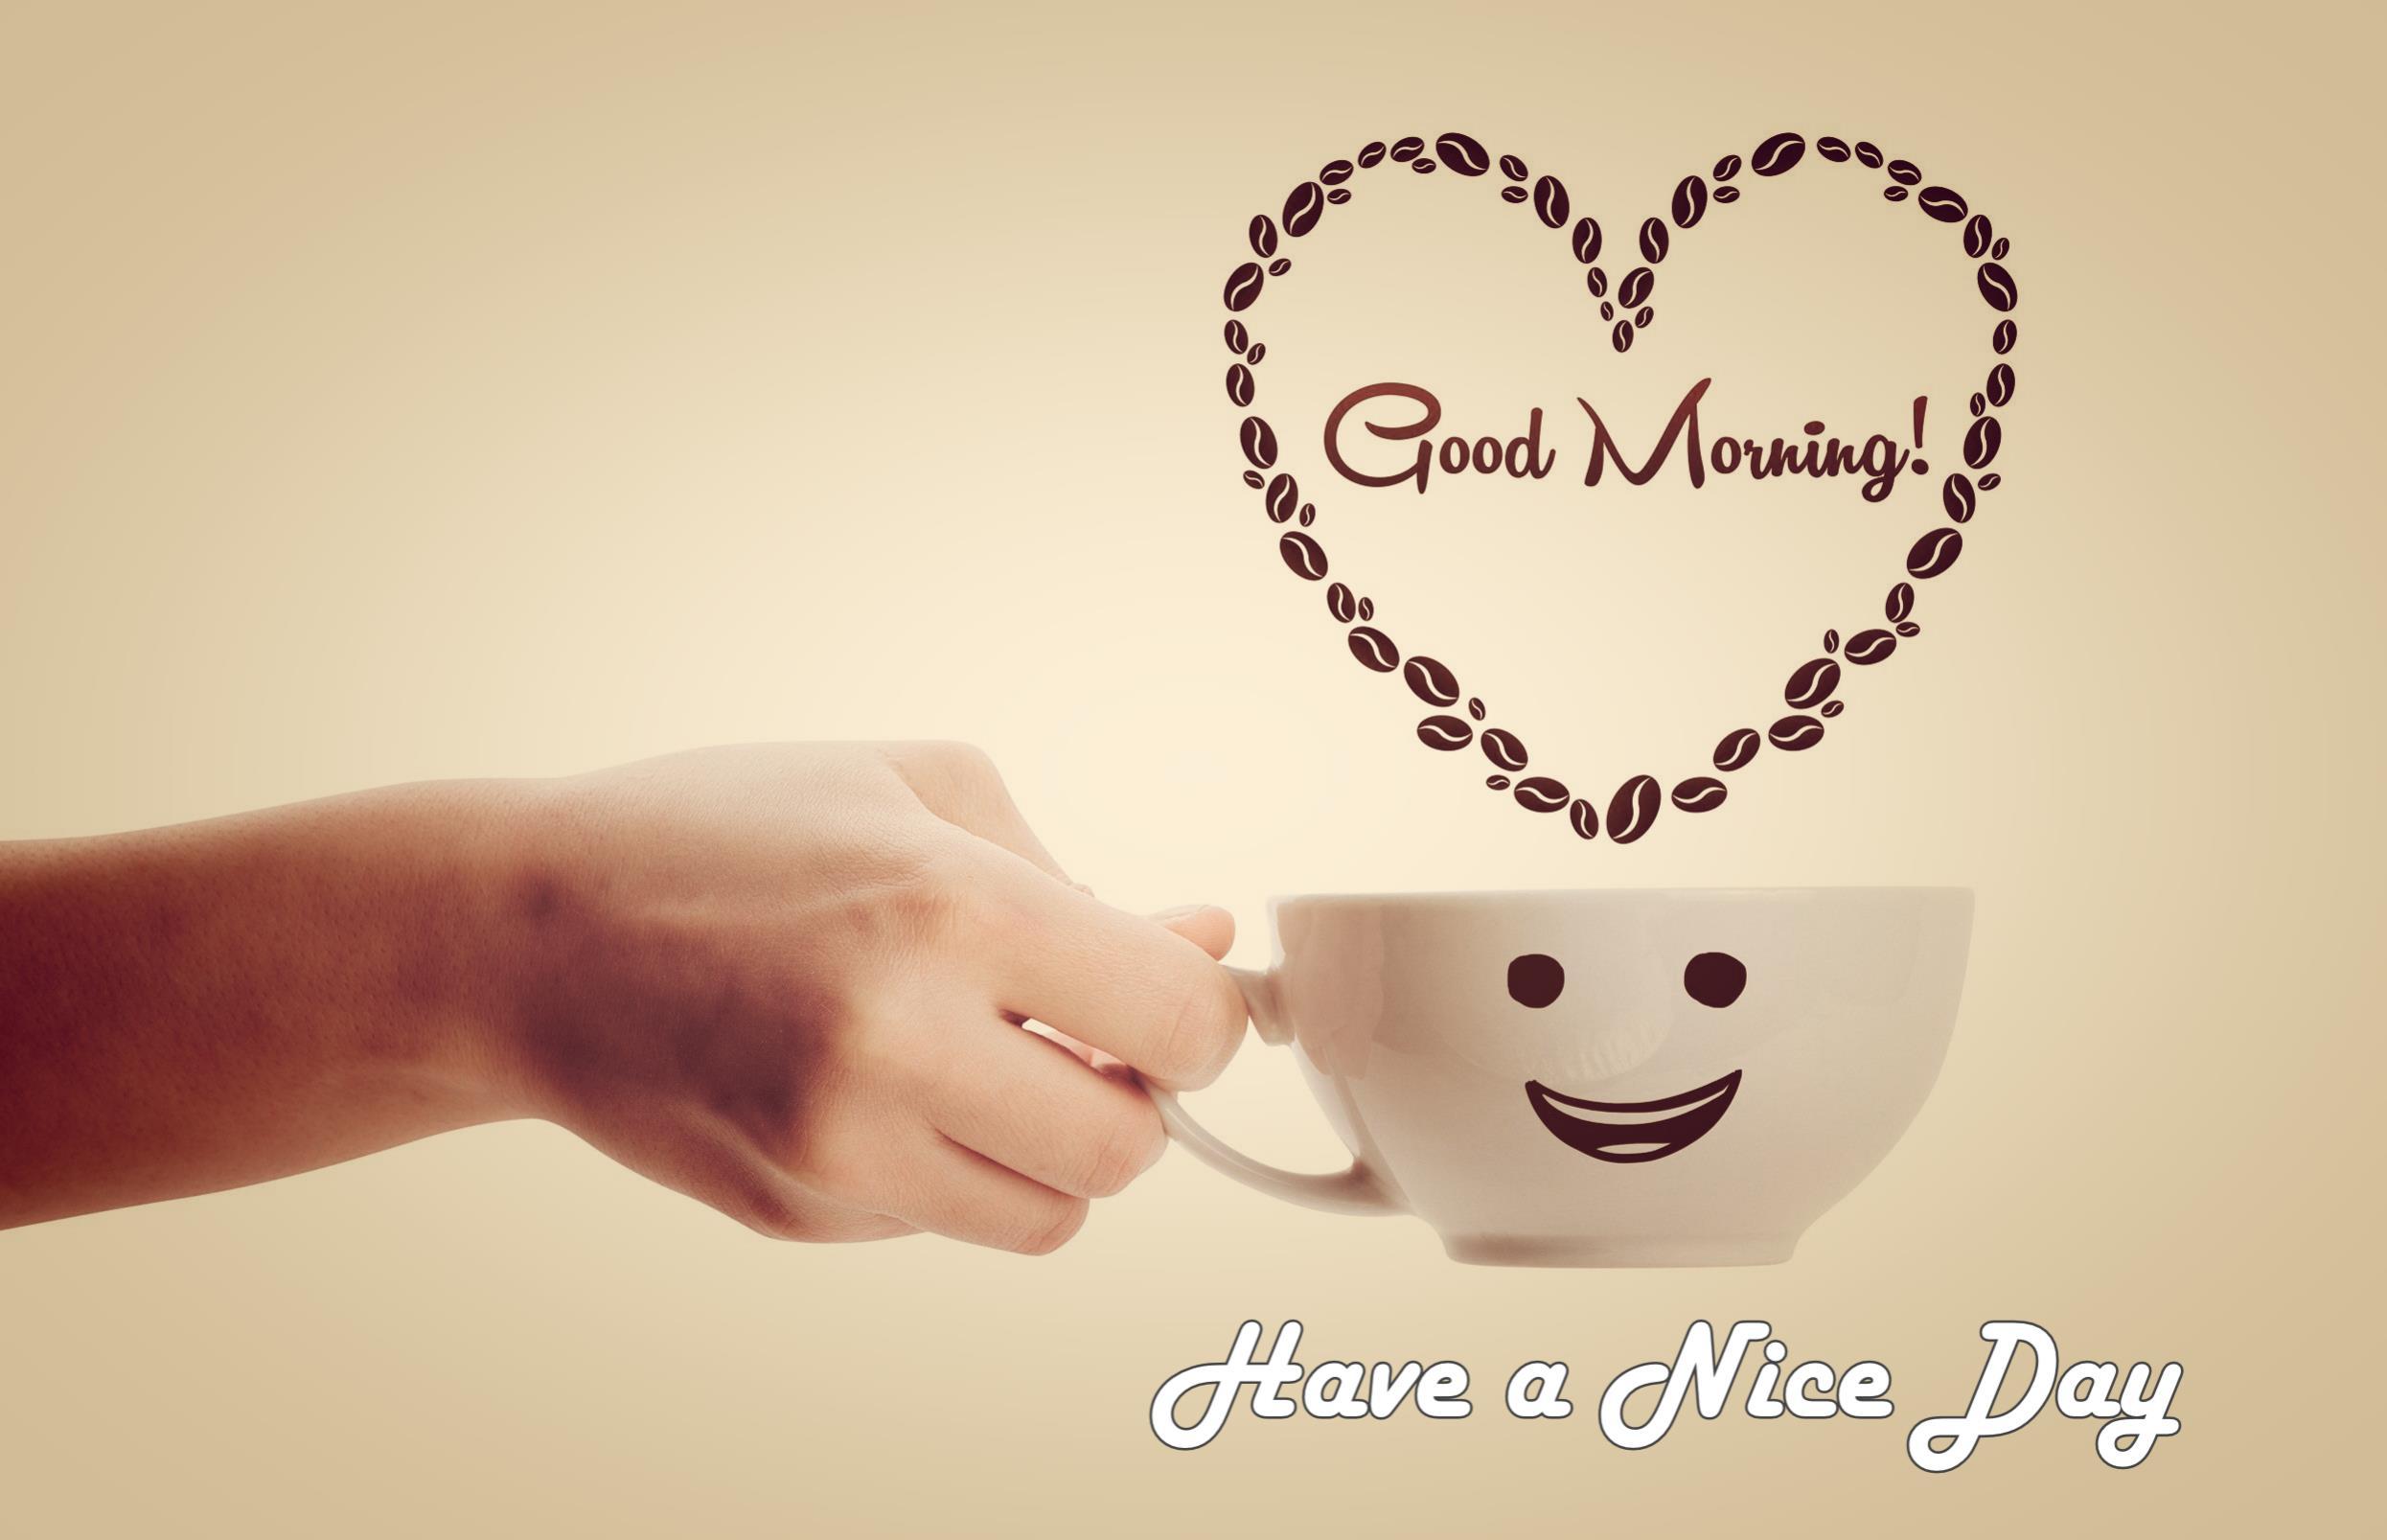 image of Best Good Morning Wishes HD Wallpaper